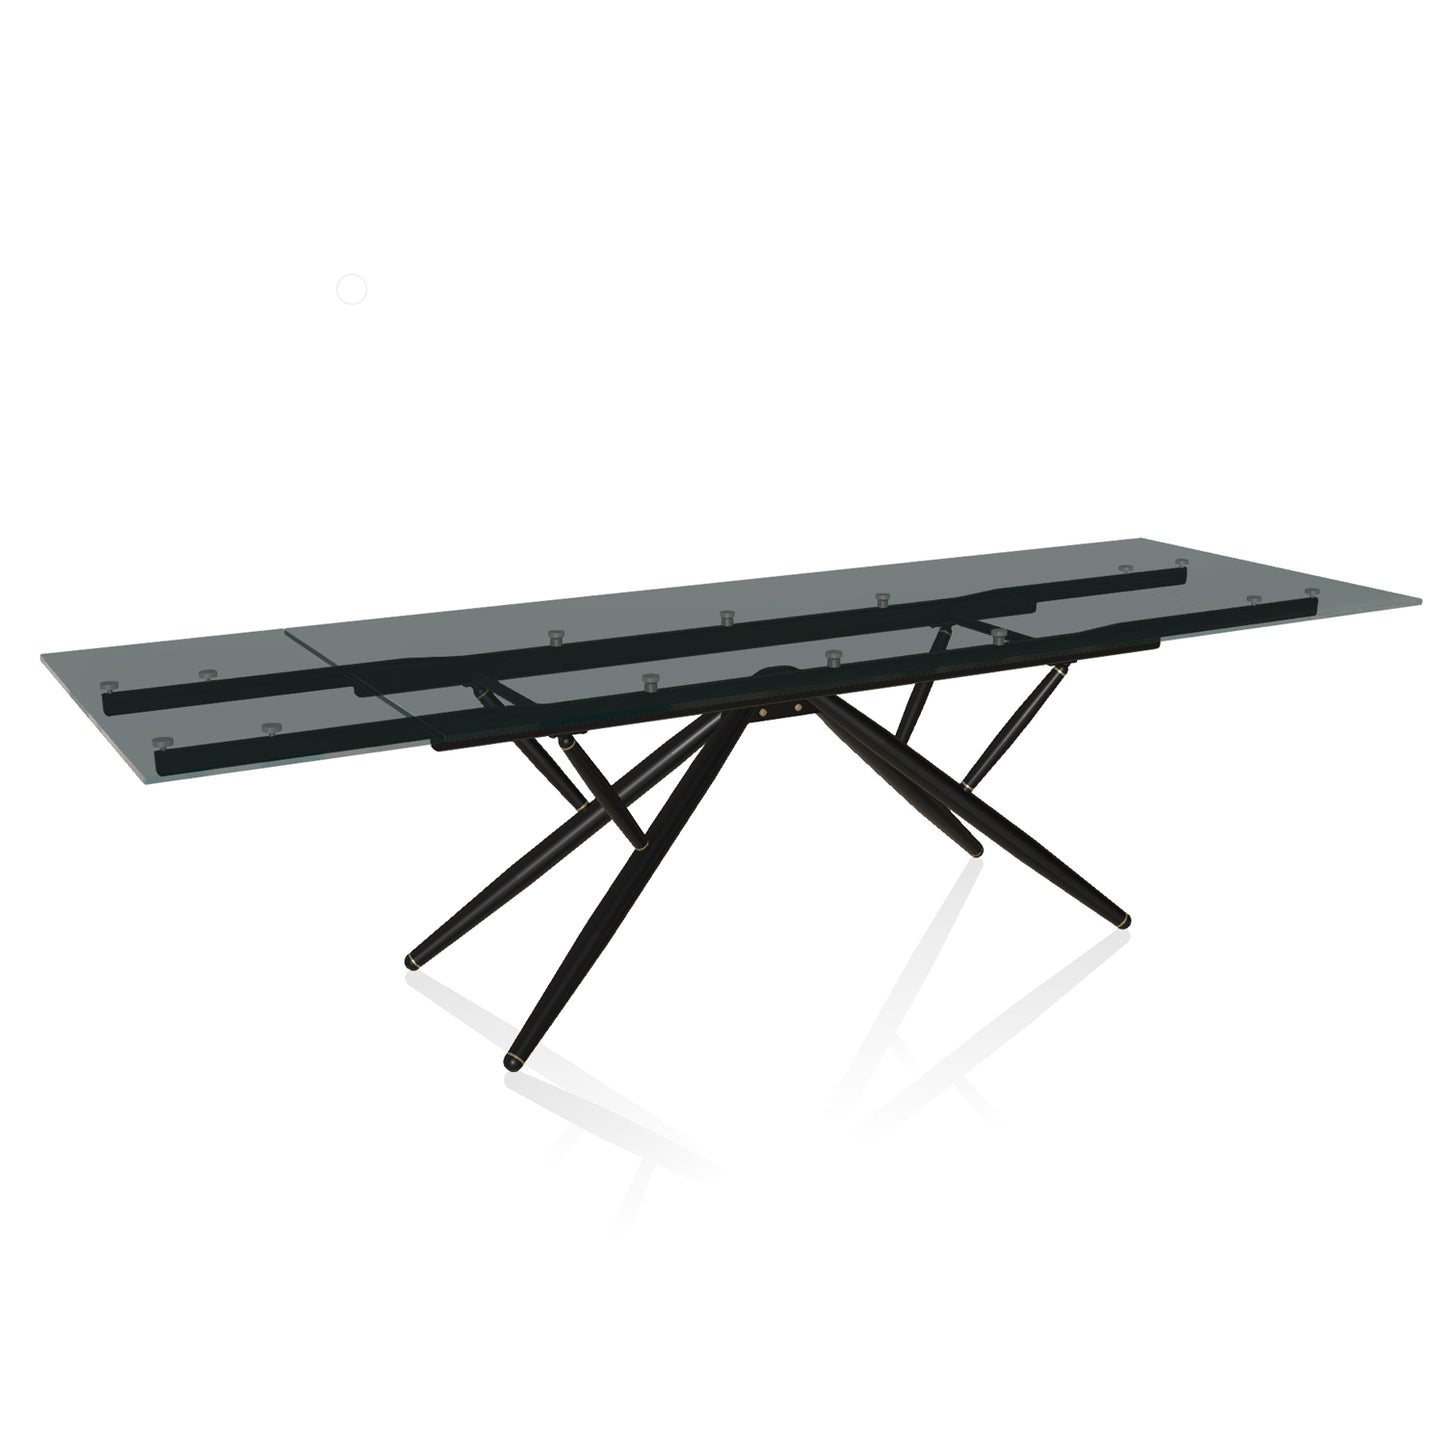 Bridge Extending Dining Table By Bontempi Casa - Black & Gold With Smoked Glass